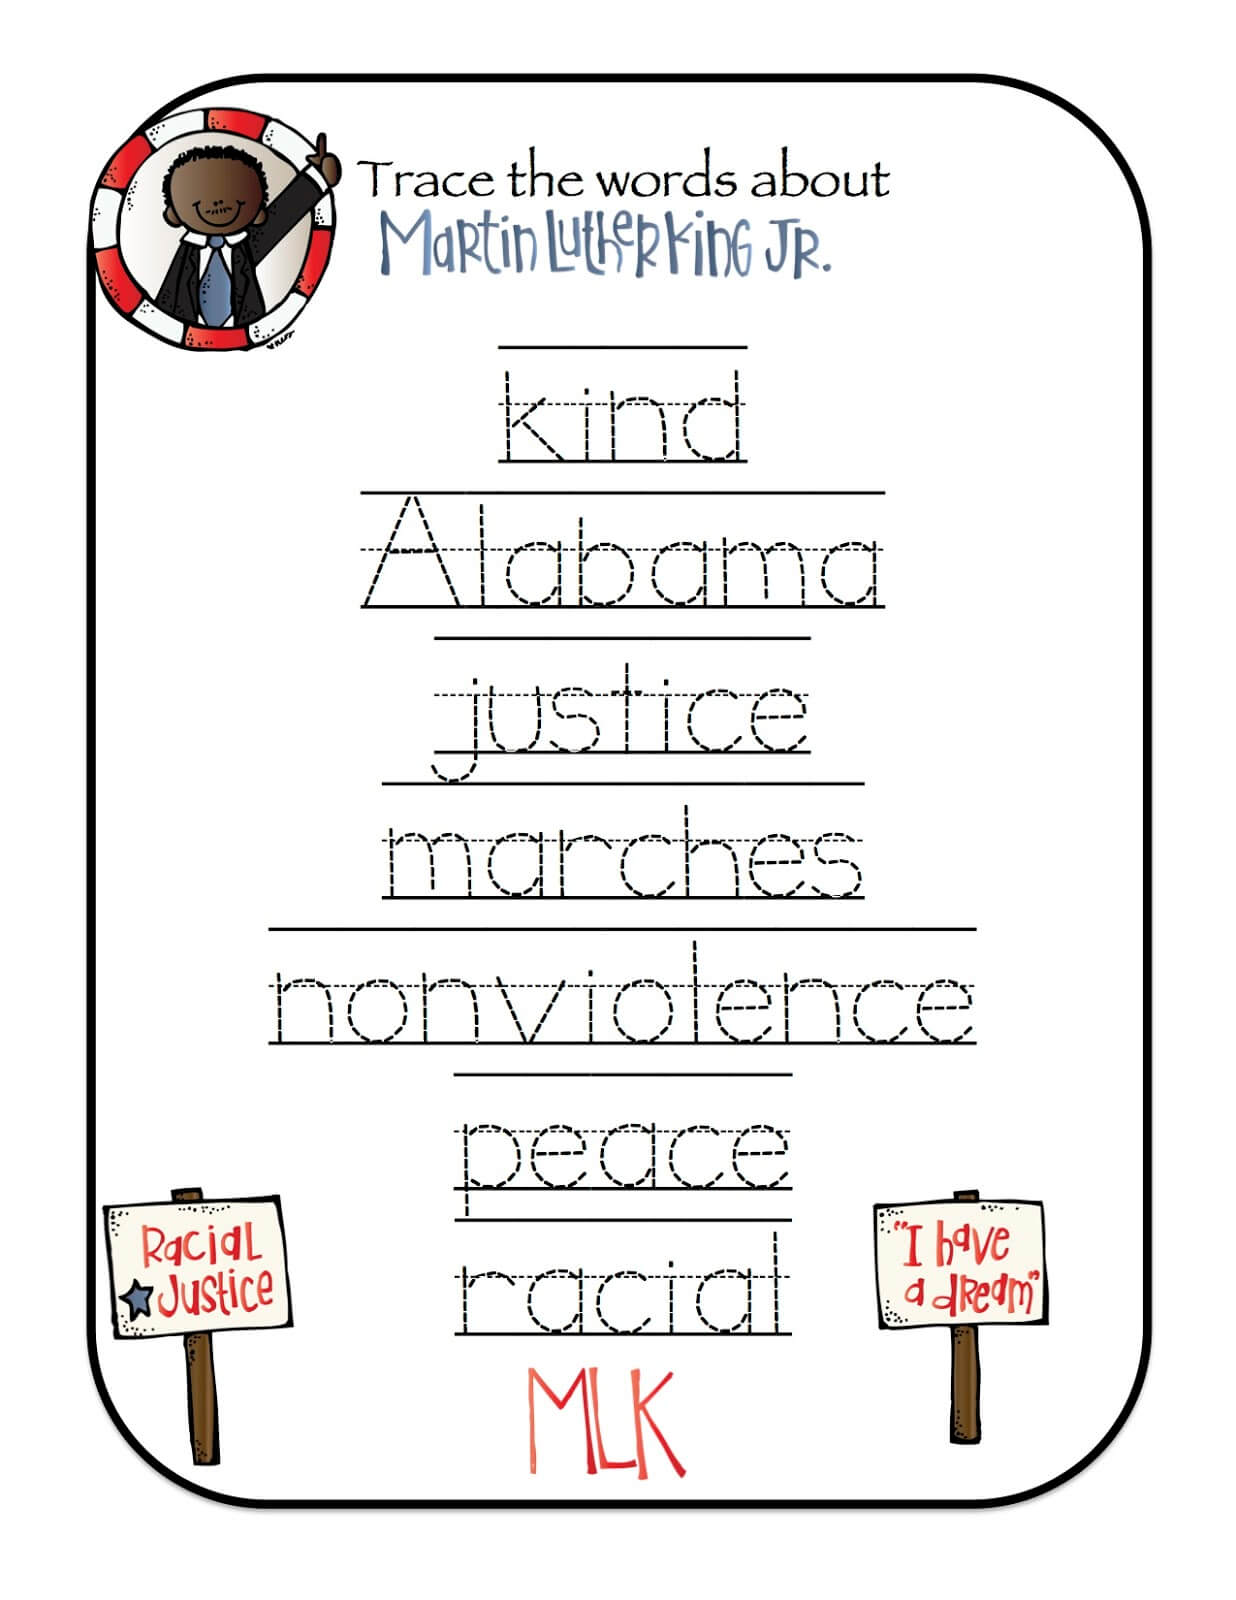 Martin Luther King Jr Word Trace Worksheet no2